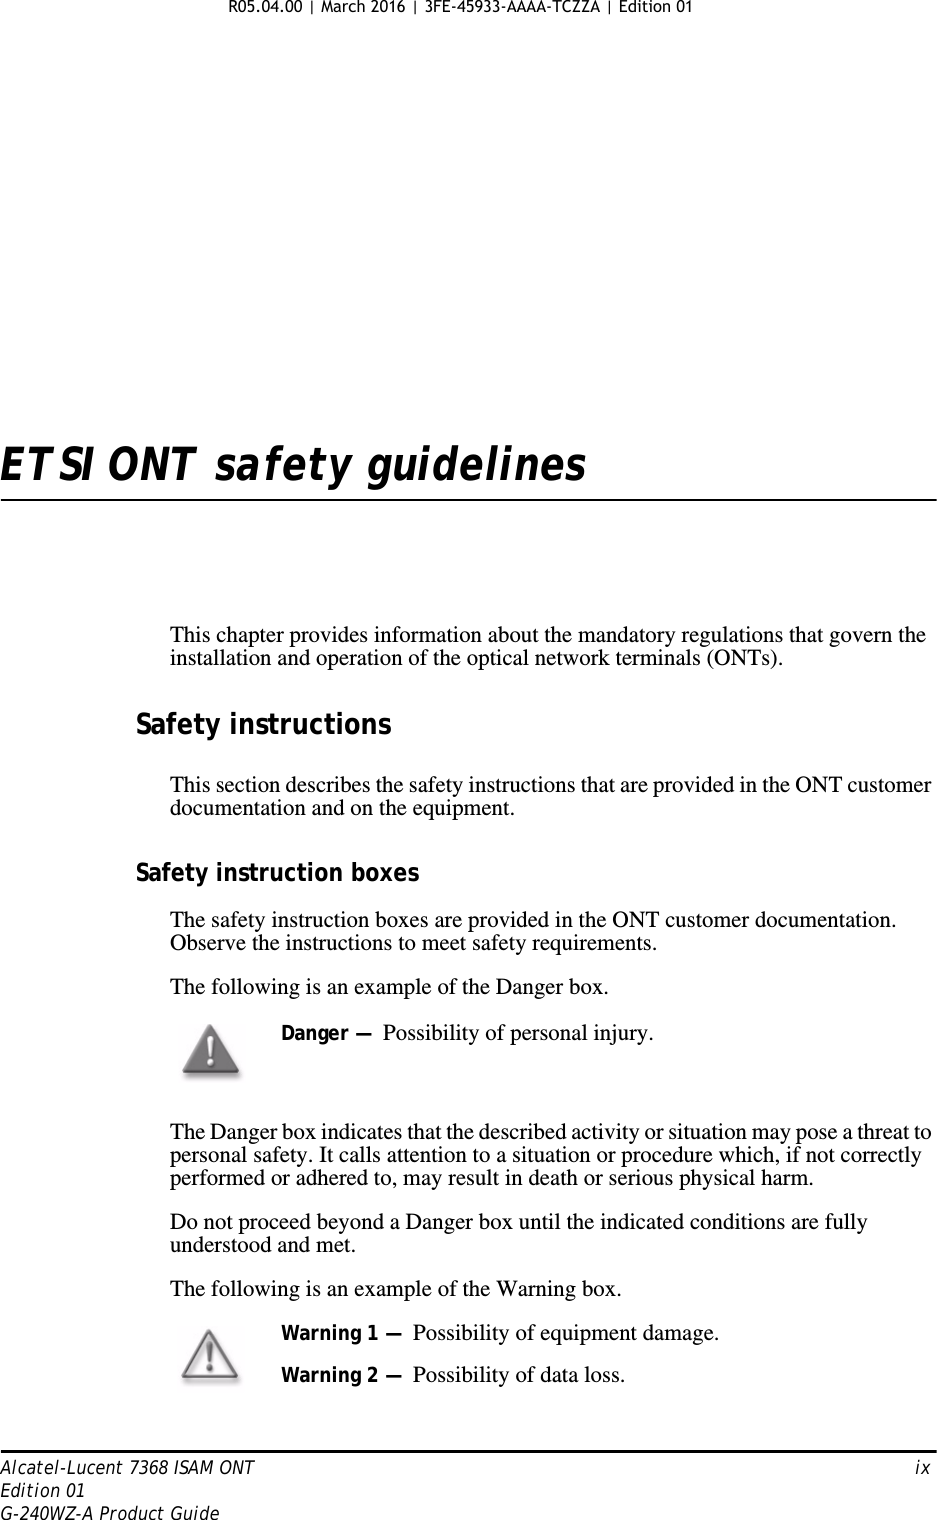 Alcatel-Lucent 7368 ISAM ONT   ixEdition 01G-240WZ-A Product GuideETSI ONT safety guidelinesThis chapter provides information about the mandatory regulations that govern the installation and operation of the optical network terminals (ONTs).Safety instructionsThis section describes the safety instructions that are provided in the ONT customer documentation and on the equipment.Safety instruction boxesThe safety instruction boxes are provided in the ONT customer documentation. Observe the instructions to meet safety requirements.The following is an example of the Danger box.The Danger box indicates that the described activity or situation may pose a threat to personal safety. It calls attention to a situation or procedure which, if not correctly performed or adhered to, may result in death or serious physical harm. Do not proceed beyond a Danger box until the indicated conditions are fully understood and met.The following is an example of the Warning box.Danger —  Possibility of personal injury. Warning 1 —  Possibility of equipment damage.Warning 2 —  Possibility of data loss.R05.04.00 | March 2016 | 3FE-45933-AAAA-TCZZA | Edition 01 